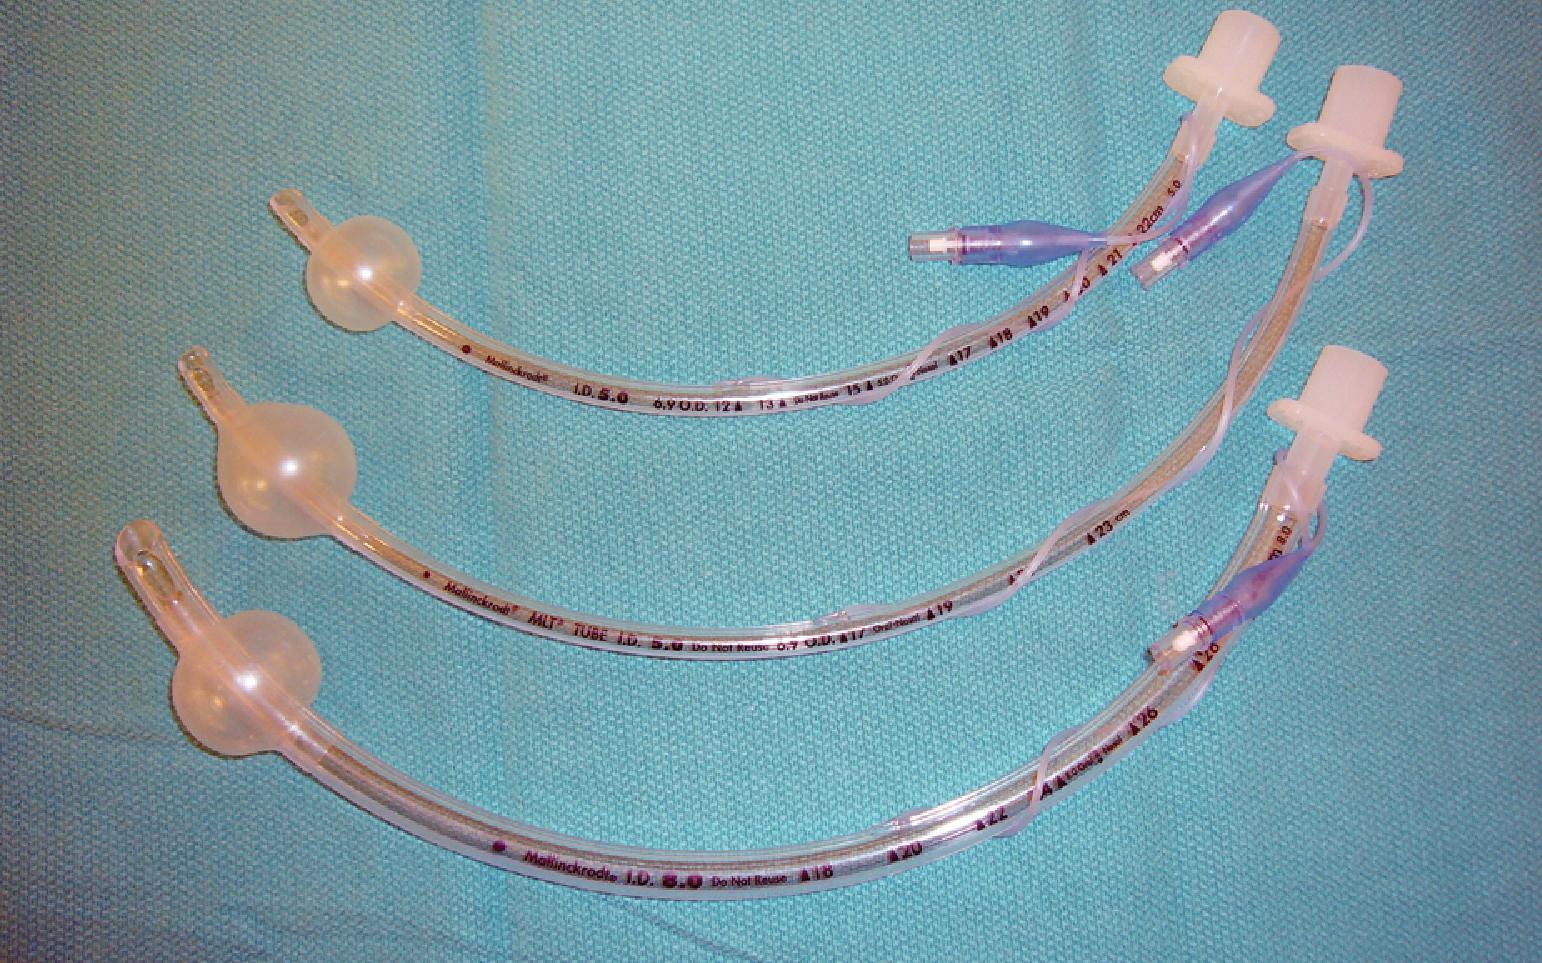 Fig. 38.4, Microlaryngeal tracheal (MLT) tube. A standard endotracheal tube (ETT) with an ID of 5.0 mm (top) is compared with a 5-mm-ID MLT tube (center) and an 8-mm-ID ETT (bottom) . A greater length and bigger cuff diameter of the MLT tube (equivalent to a standard 8.0-mm-ID ETT) allows a sufficient depth of tracheal placement, a connection to the anesthesia circuit, and an adequate seal of the trachea.